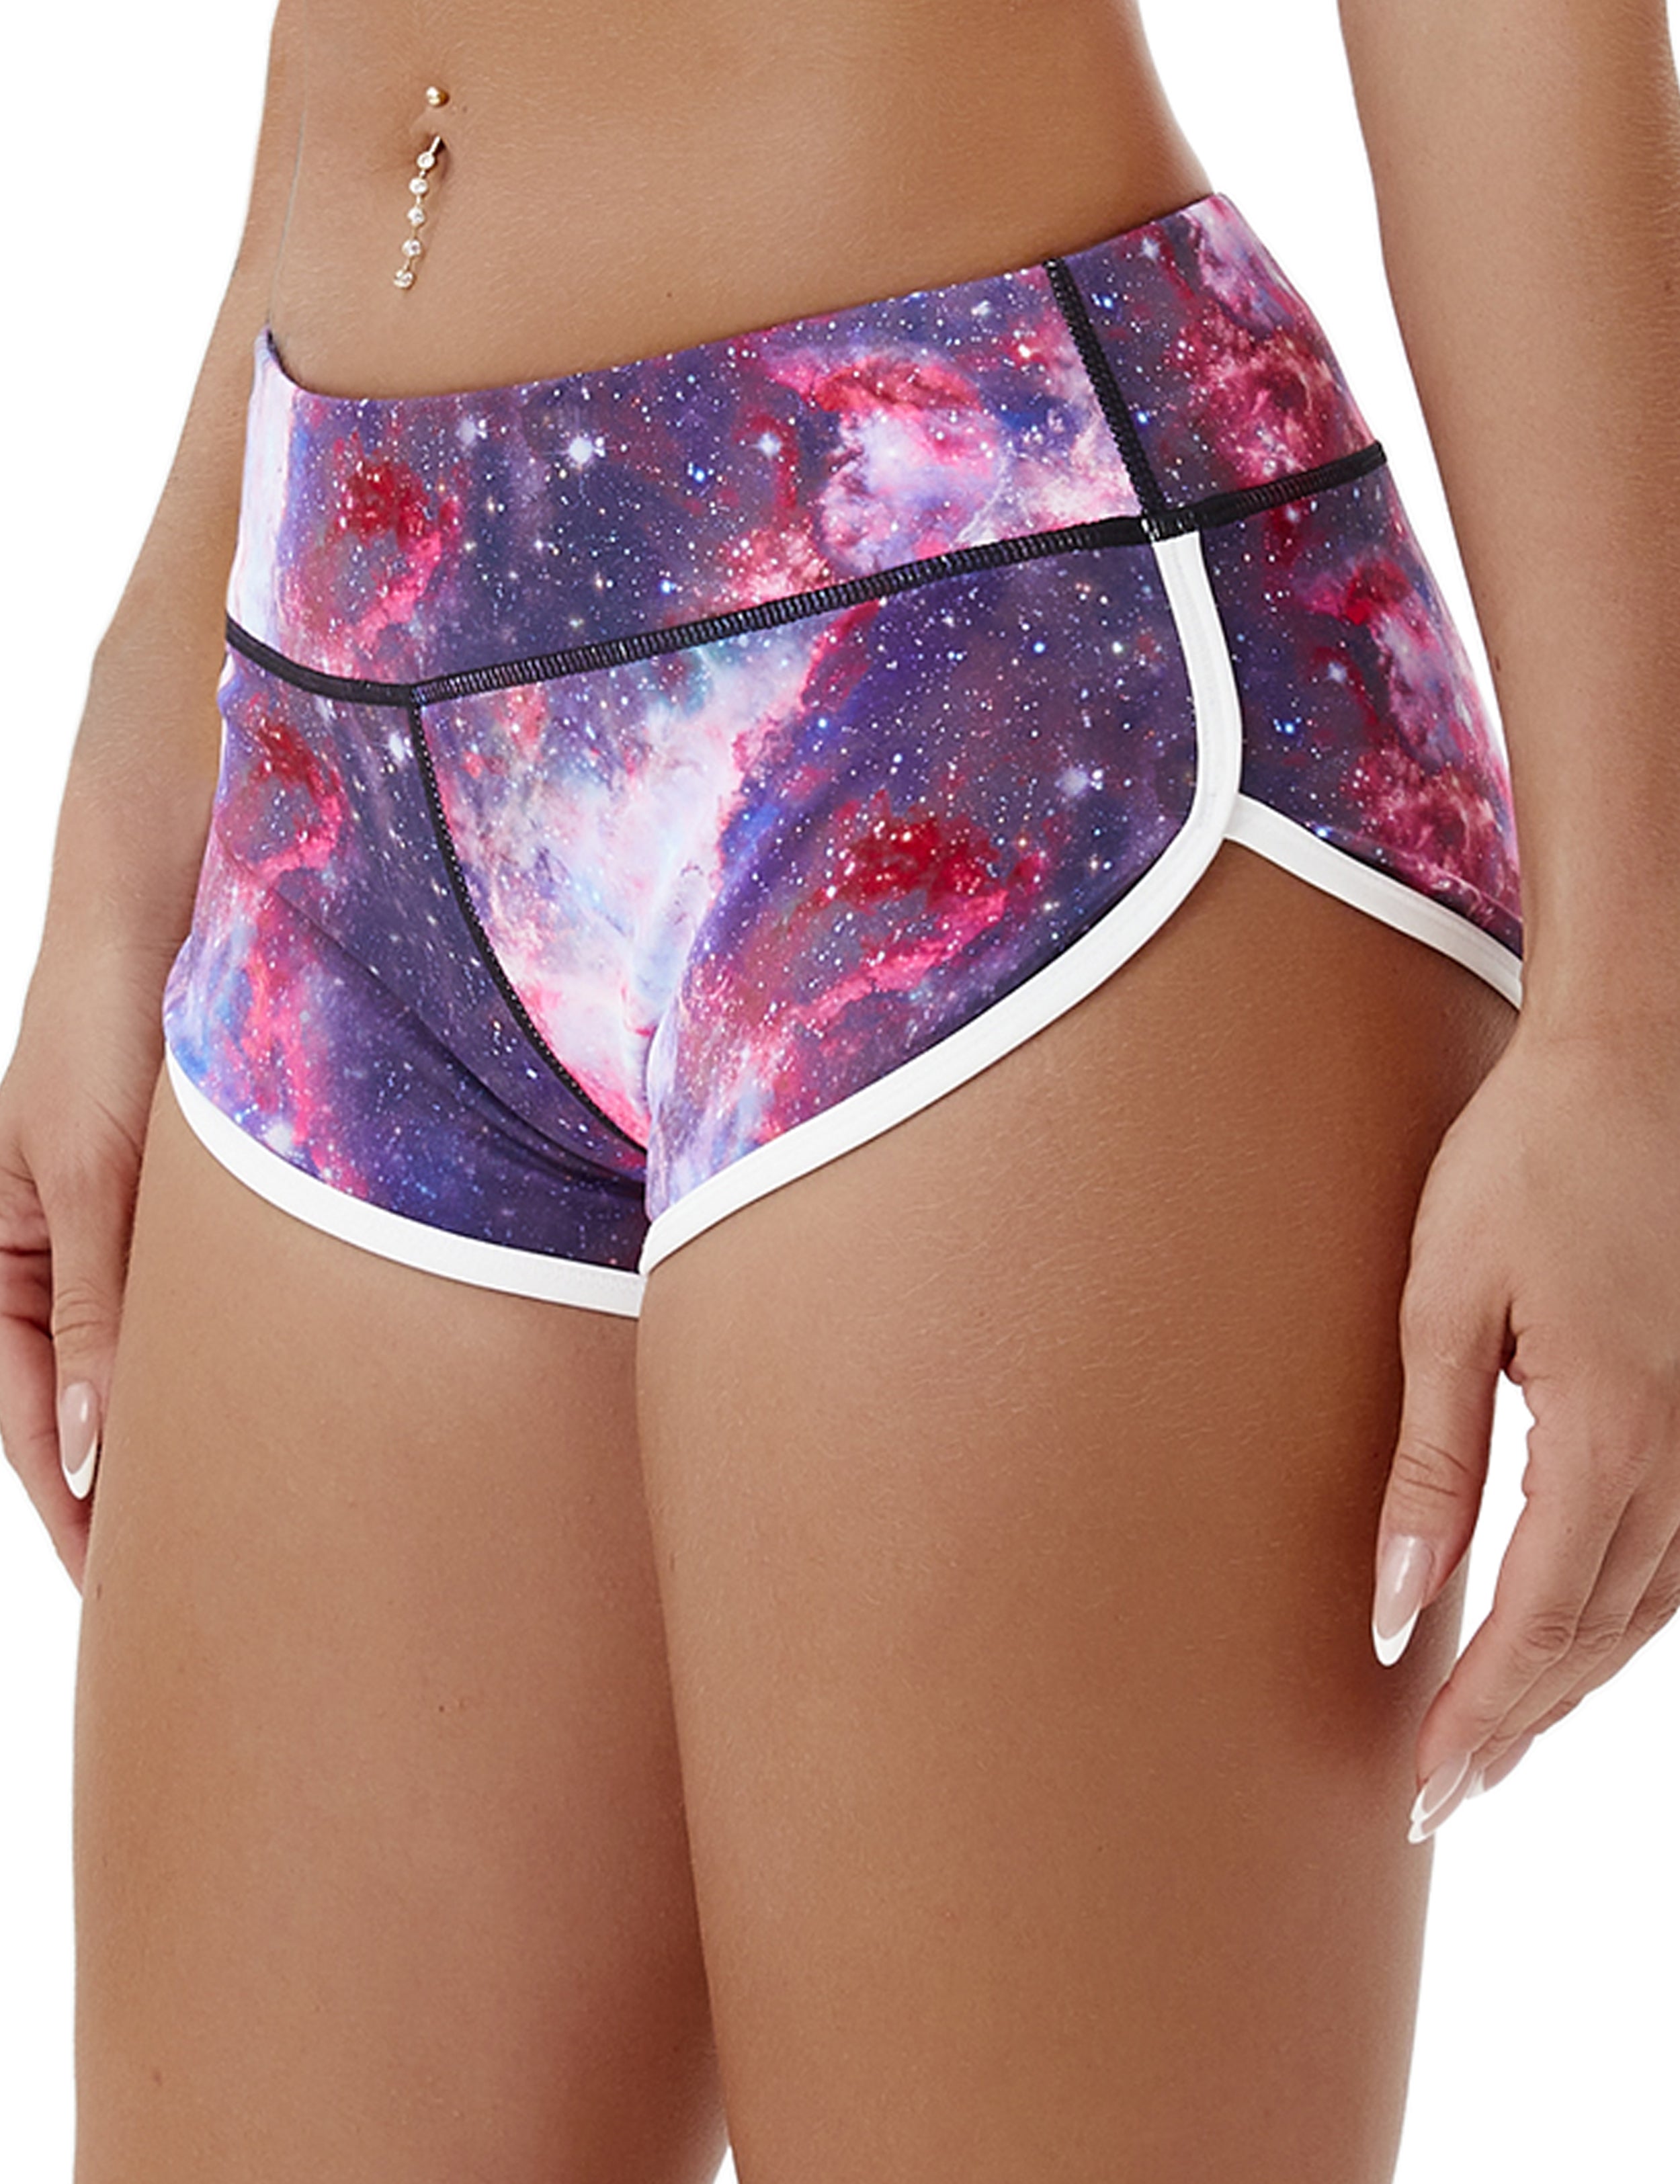 Printed Booty Tall Size Shorts galaxy Sleek, soft, smooth and totally comfortable: our newest sexy style is here. Softest-ever fabric High elasticity High density 4-way stretch Fabric doesn't attract lint easily No see-through Moisture-wicking Machine wash 78% Polyester, 22% Spandex